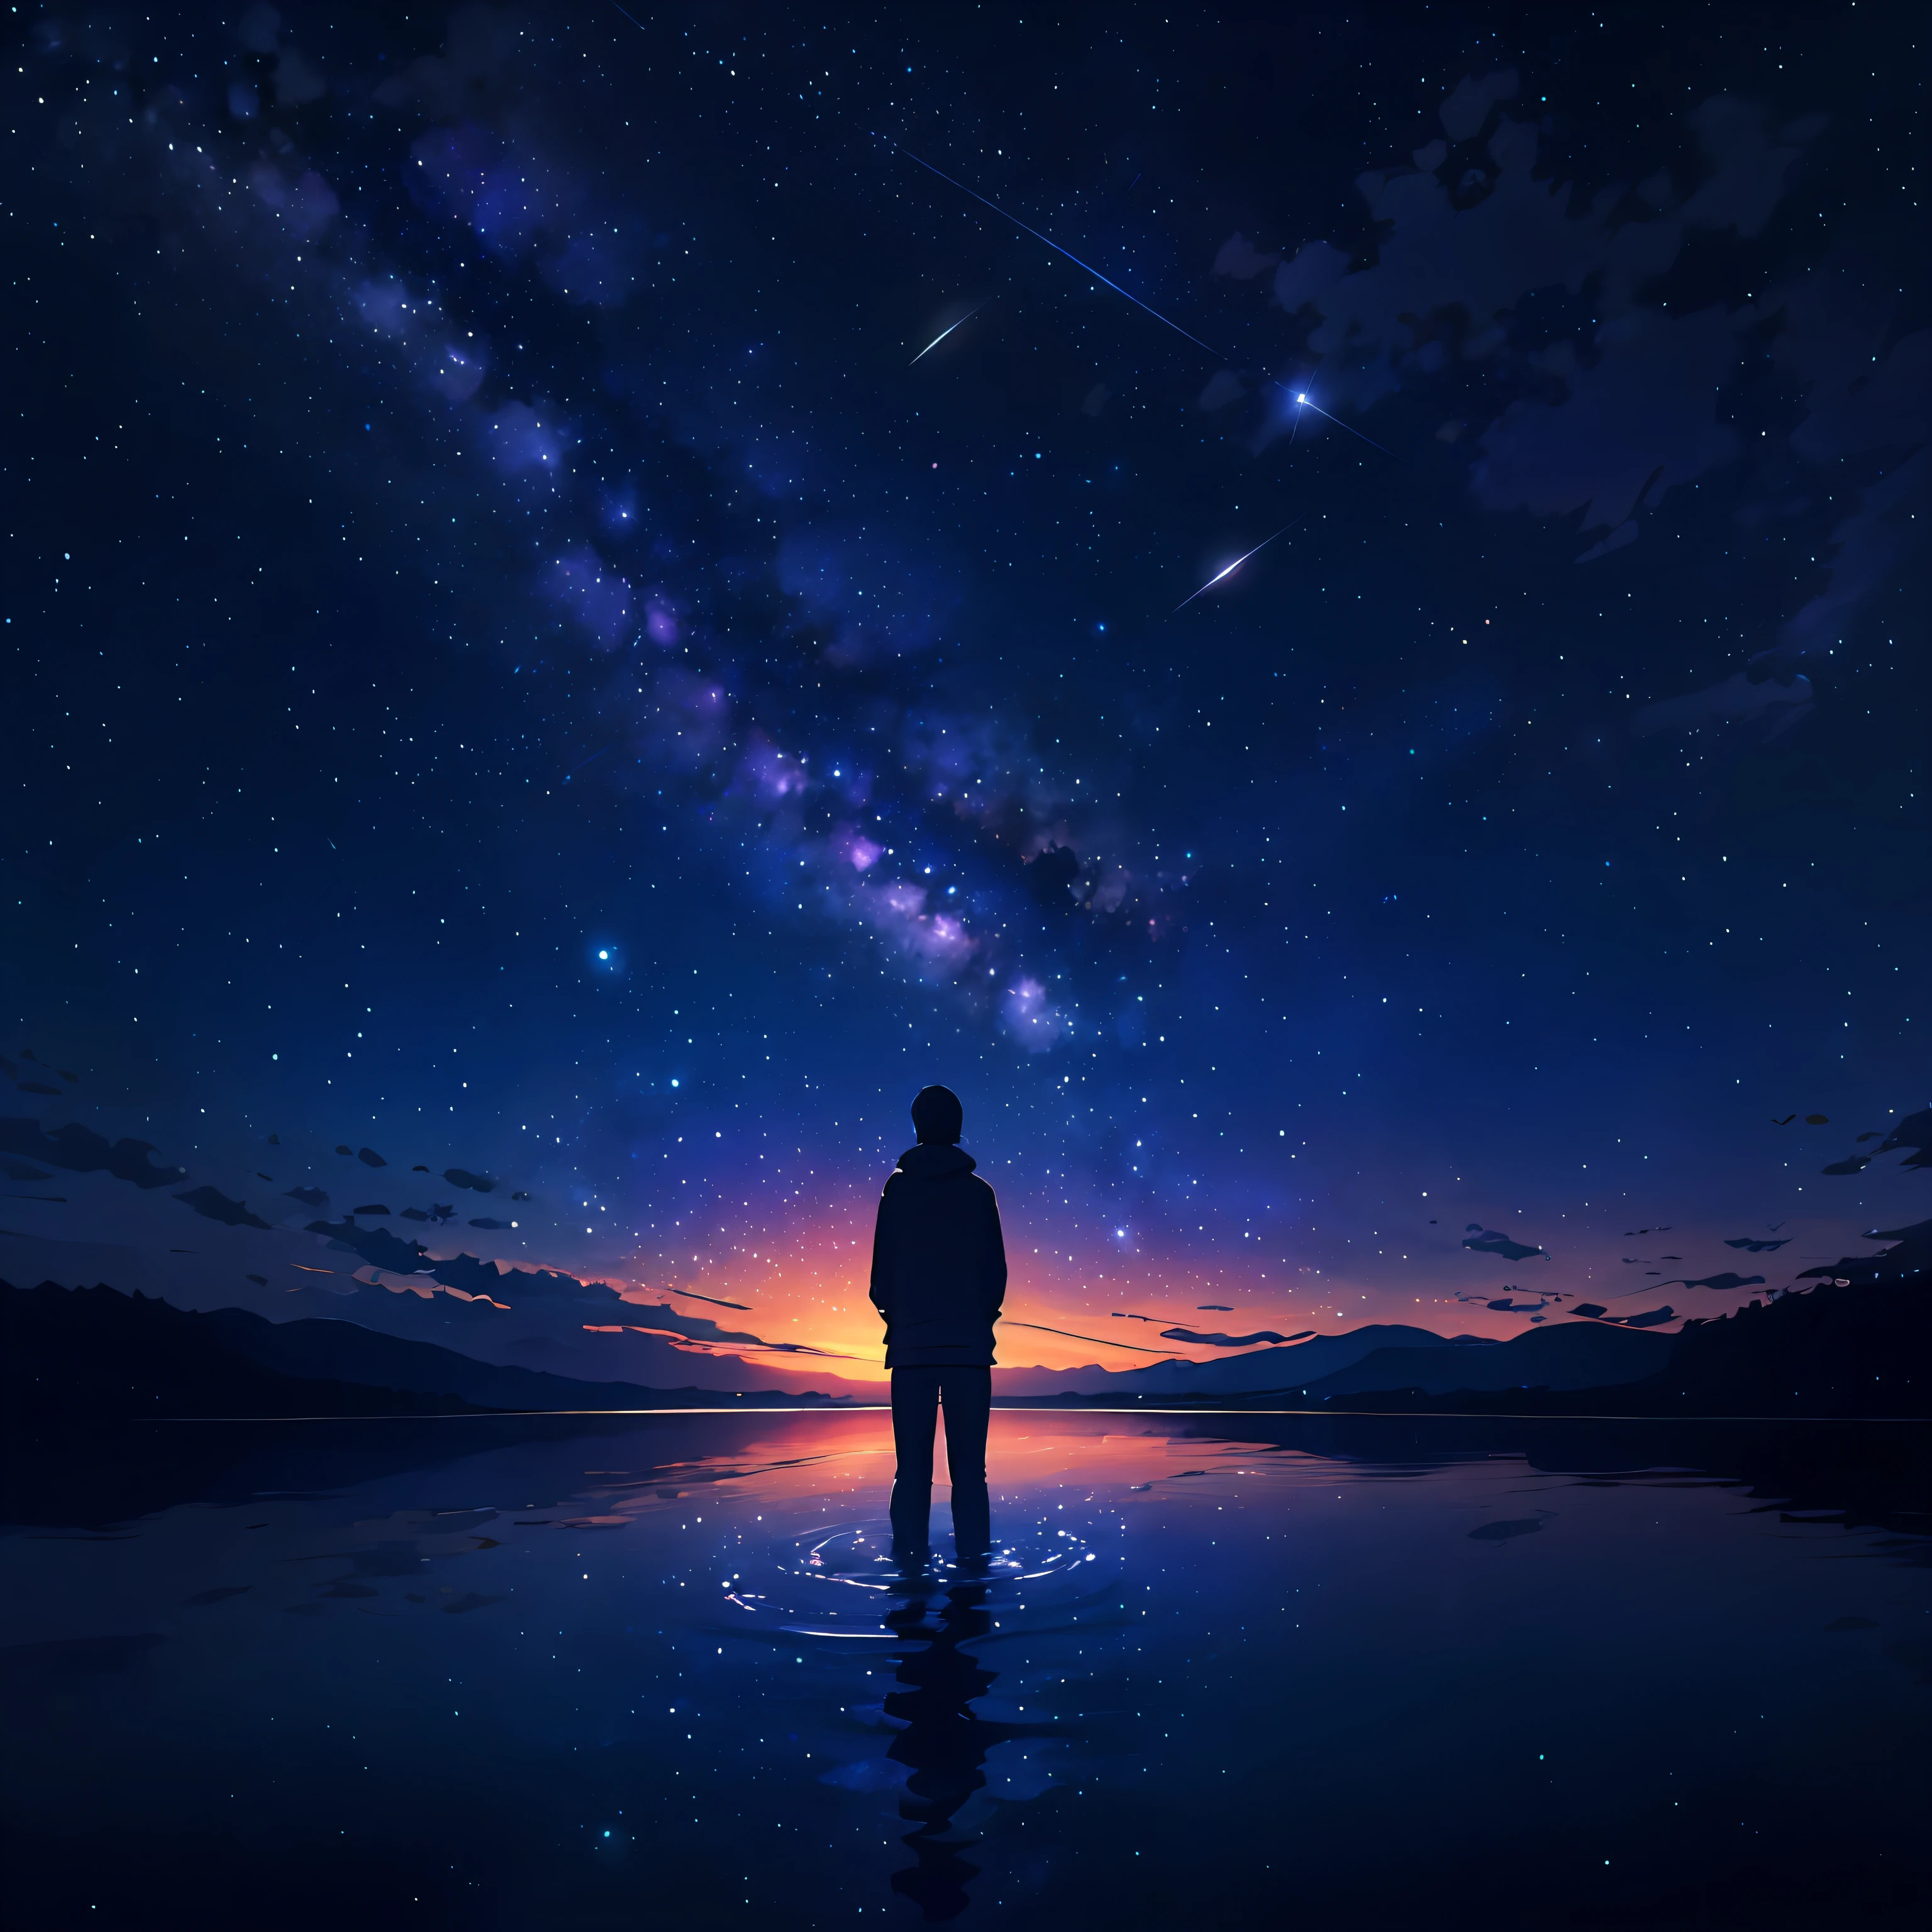 starry night sky with a person standing in the water, looking out into the cosmos, tranquility of the endless stars, --auto